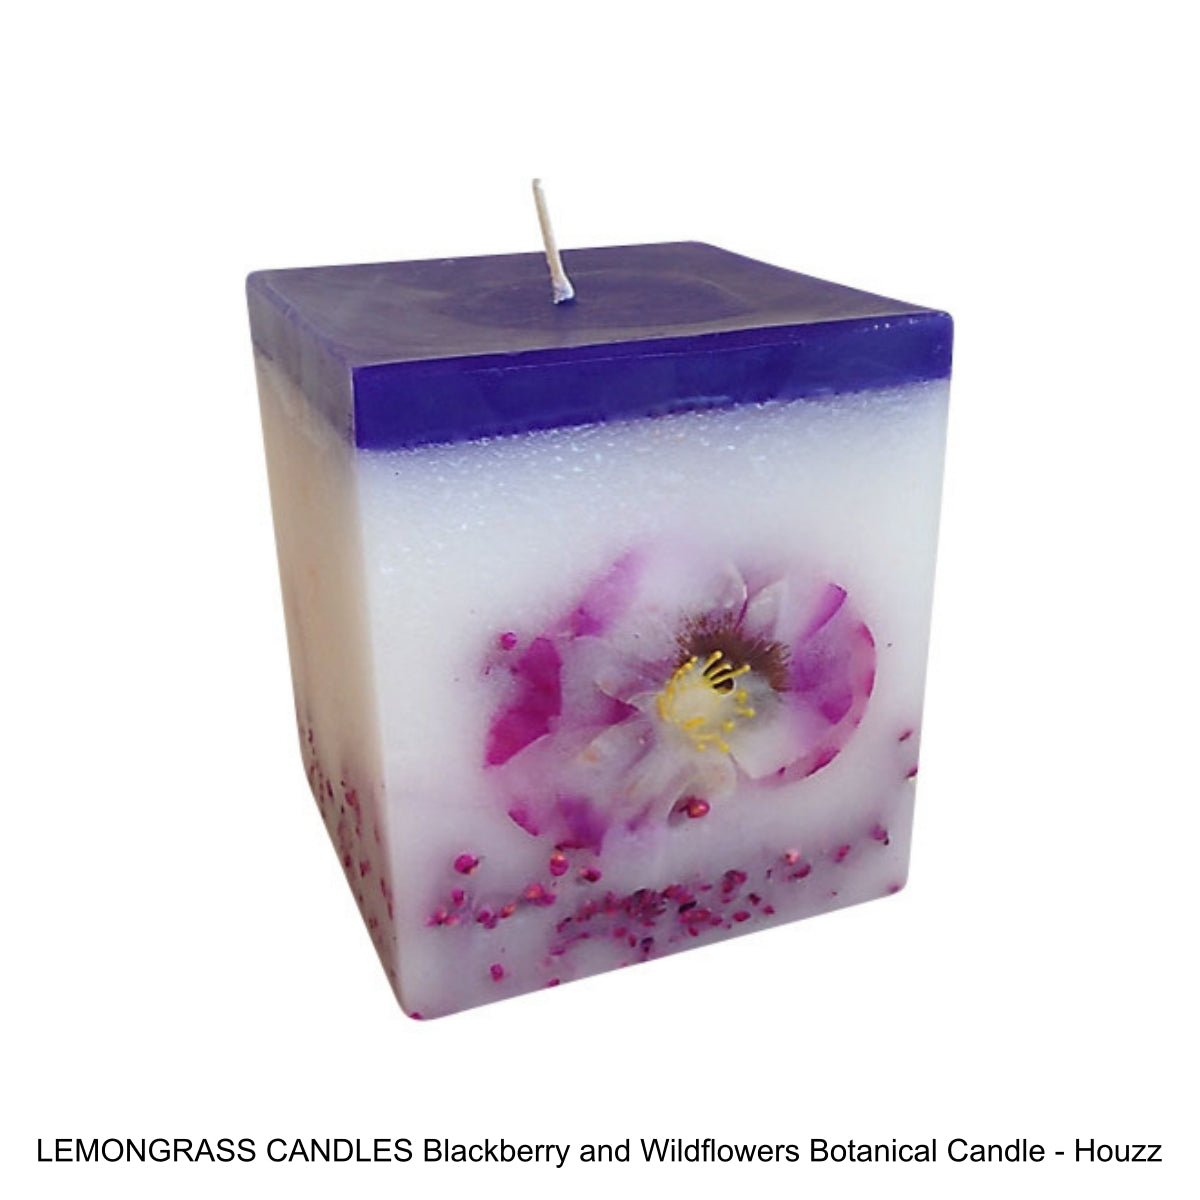 LEMONGRASS CANDLES Blackberry and Wildflowers Botanical Candle - Houzz